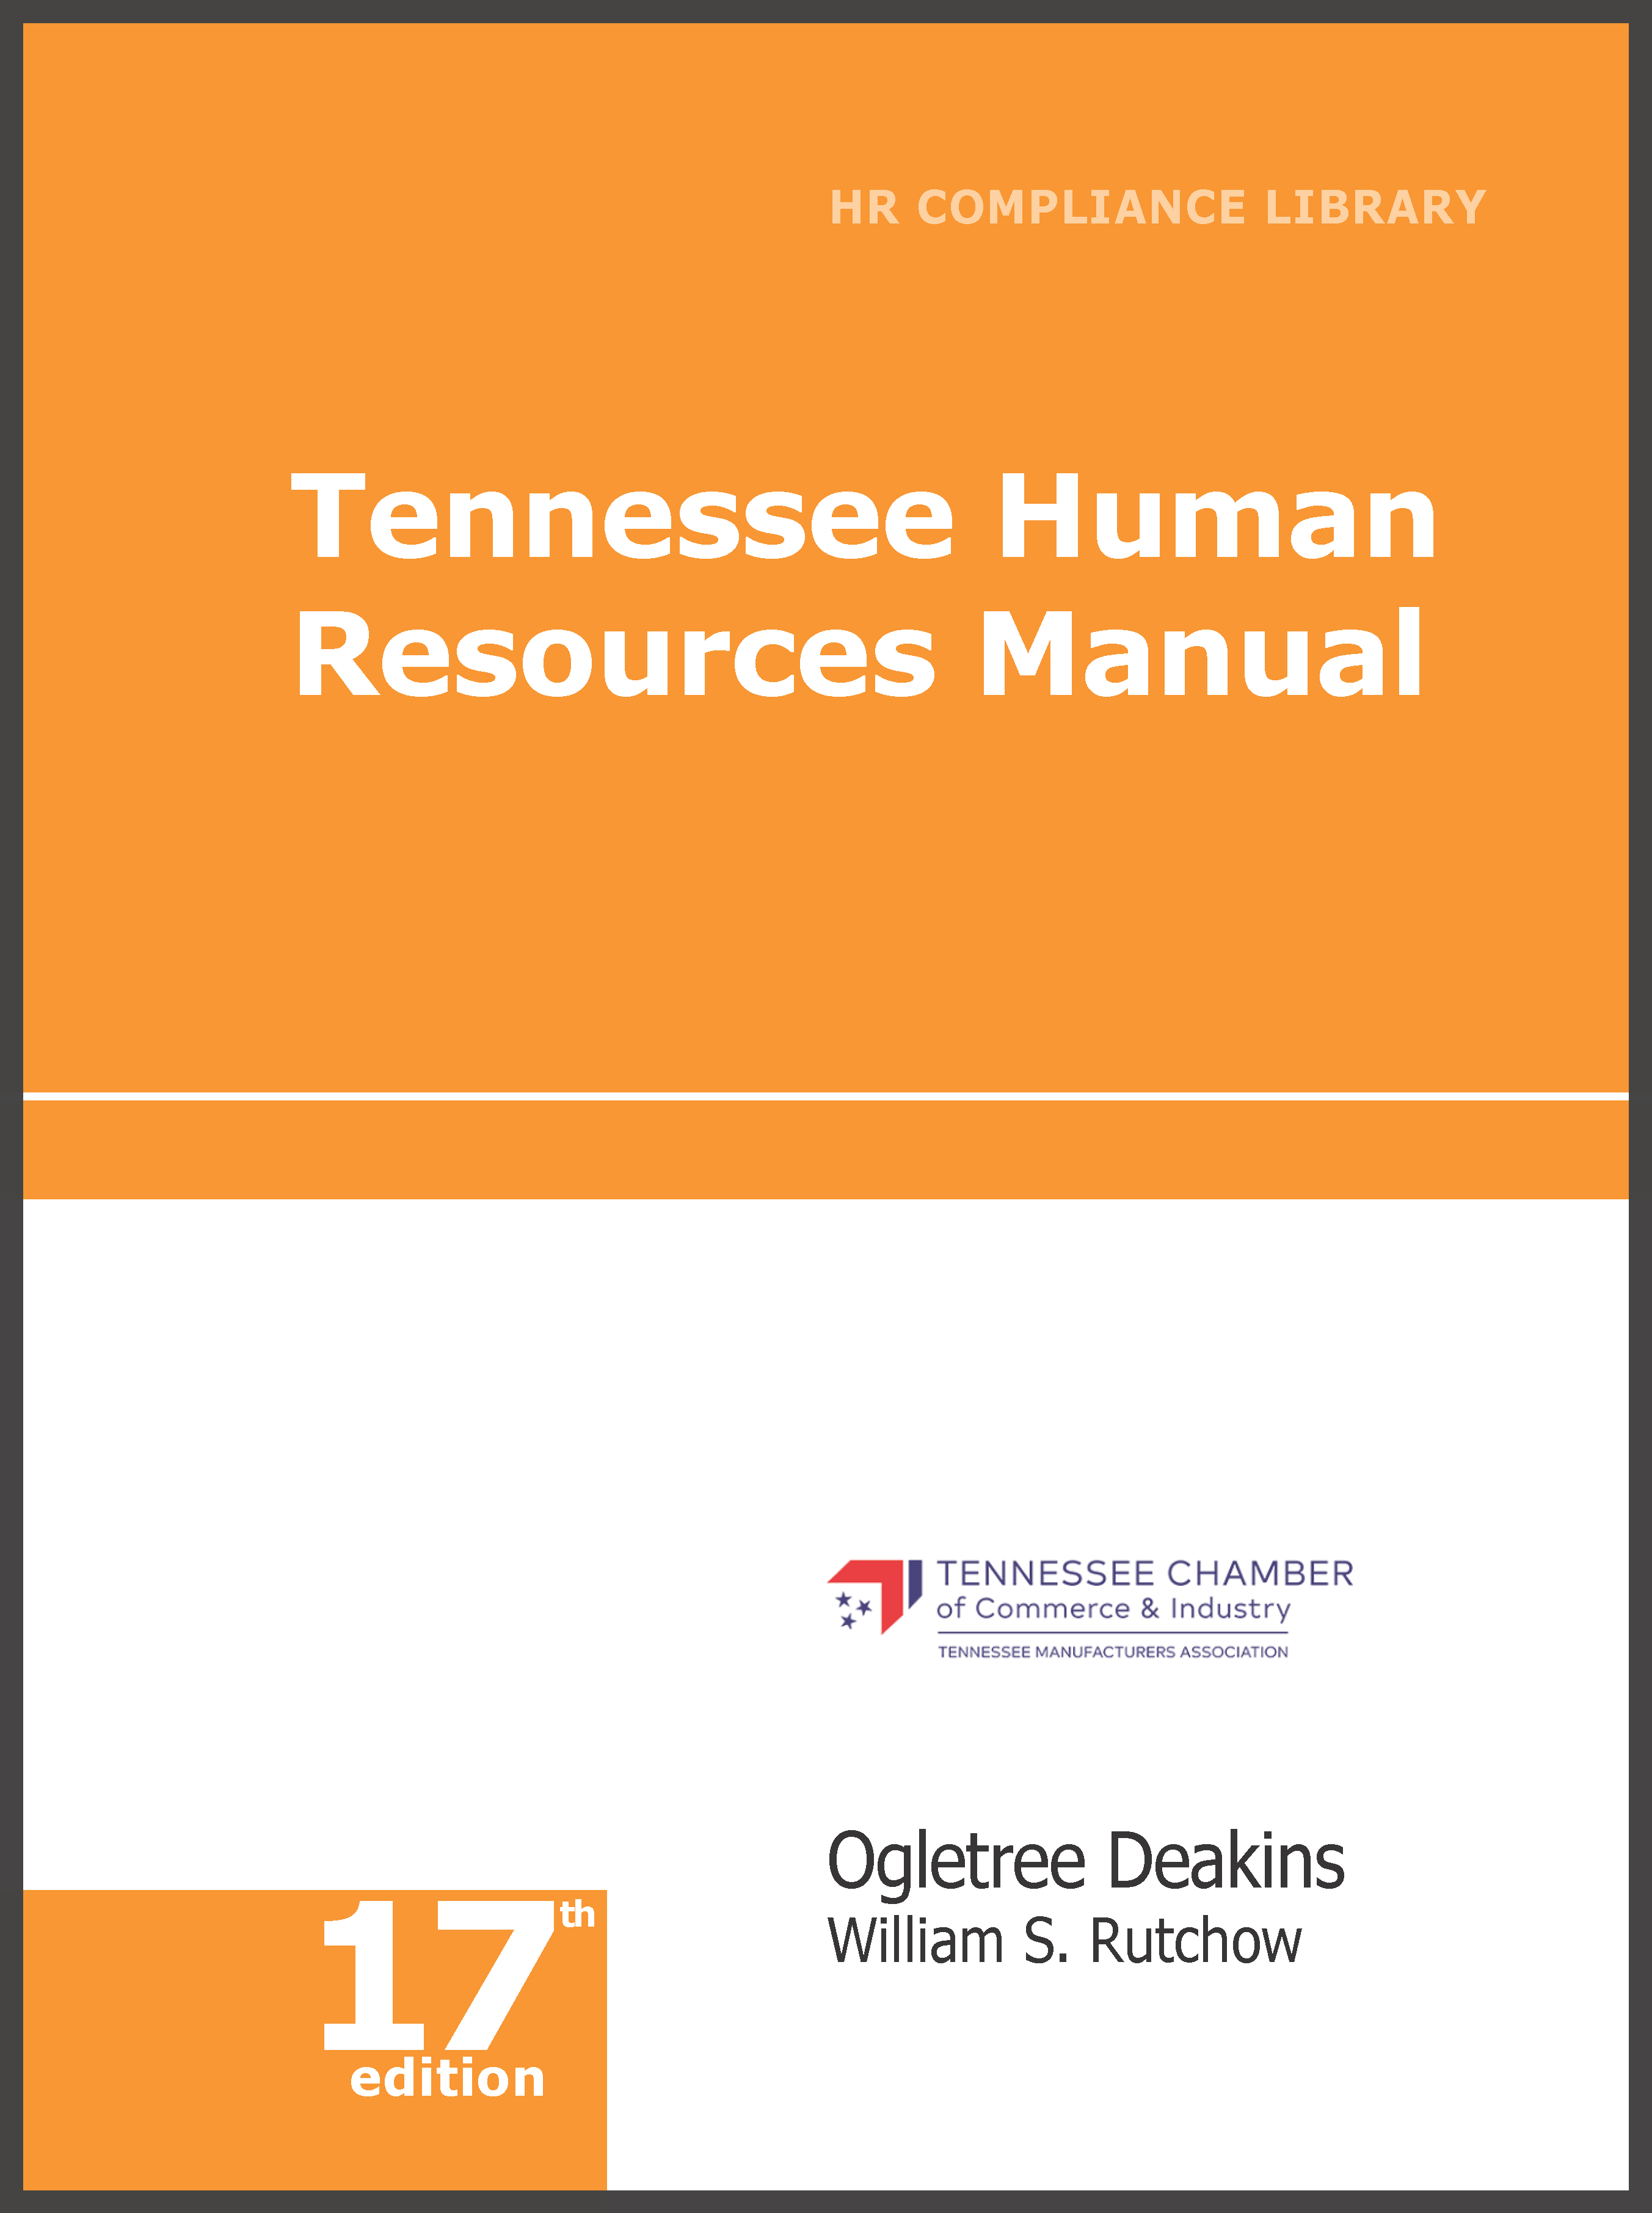 Tennessee Human Resources Library  employment law image, remote work, labor laws, employment laws, right to work, order of protection, minimum wage